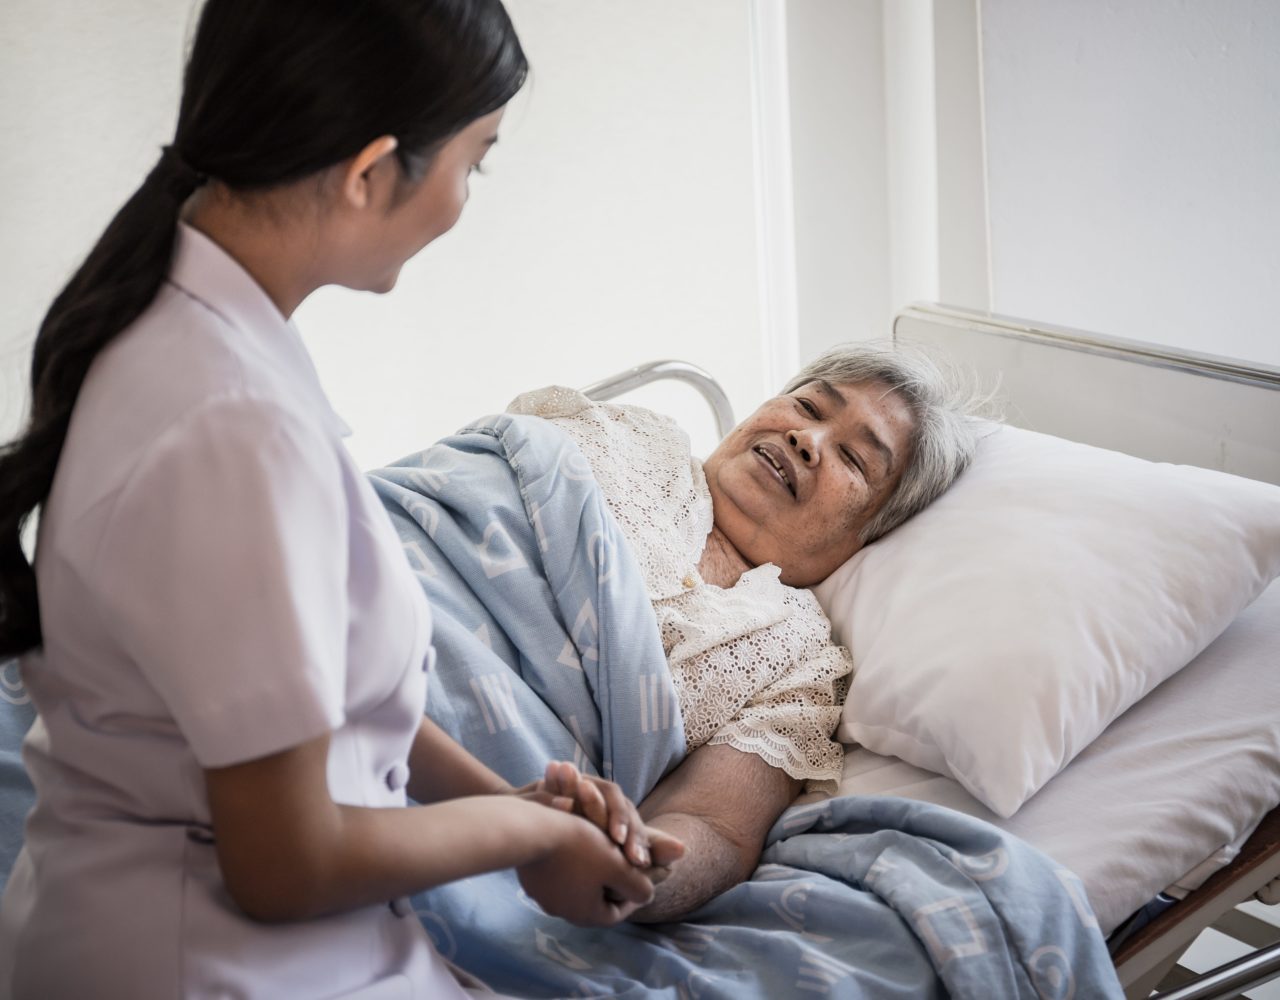 A female healthcare professional with an old lady patient laying on bed